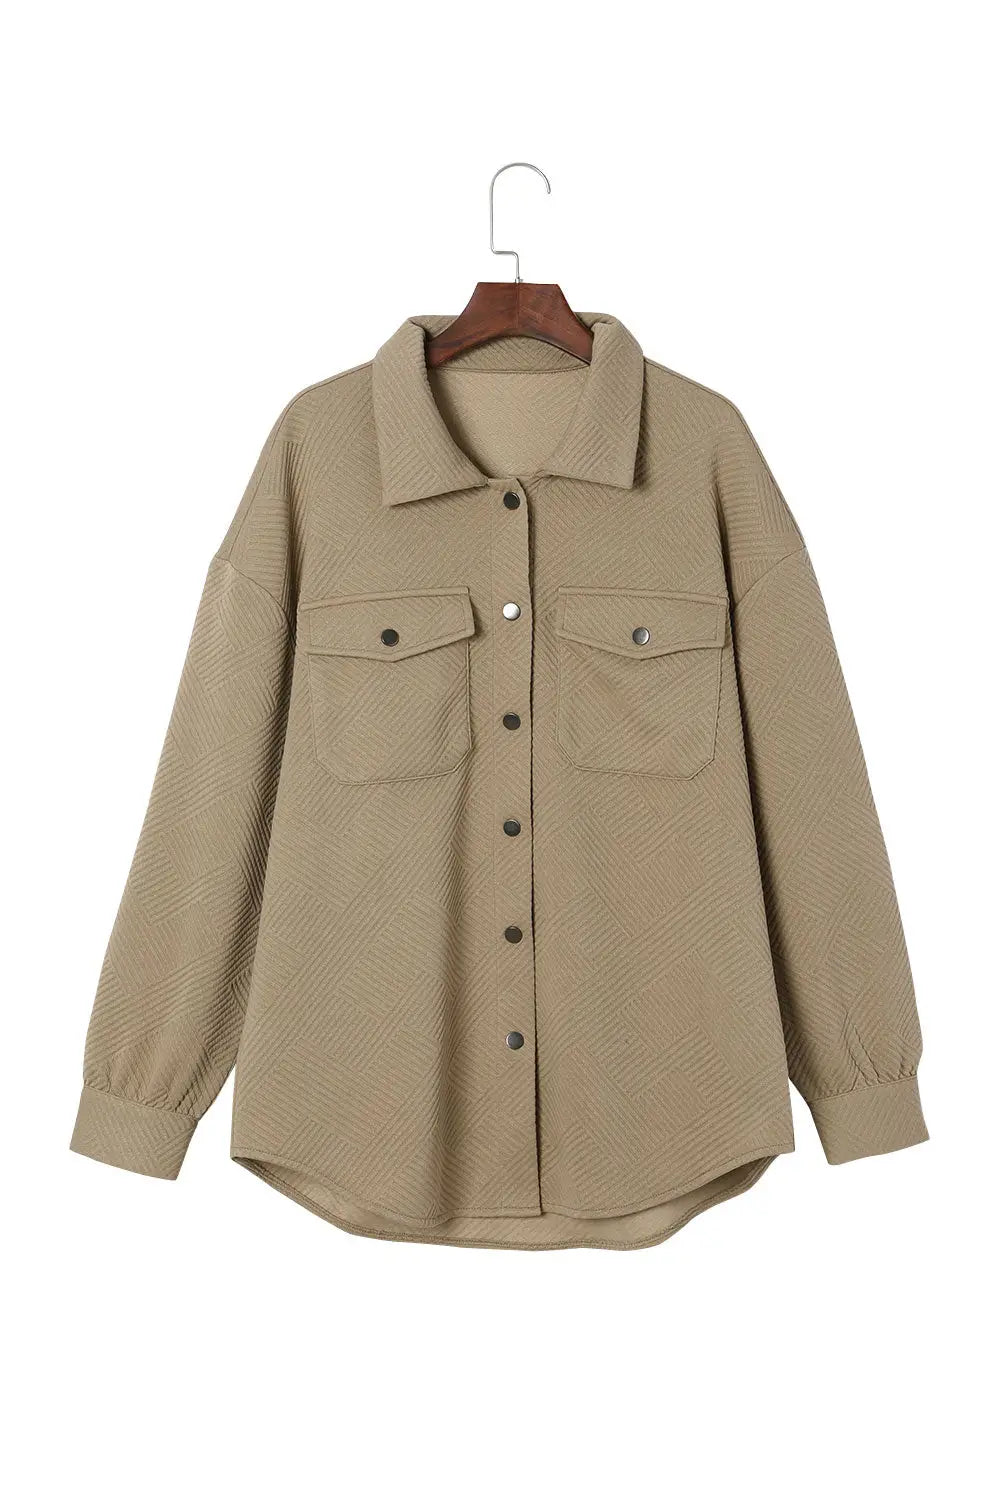 Khaki solid textured flap pocket buttoned shacket - sweaters & cardigans